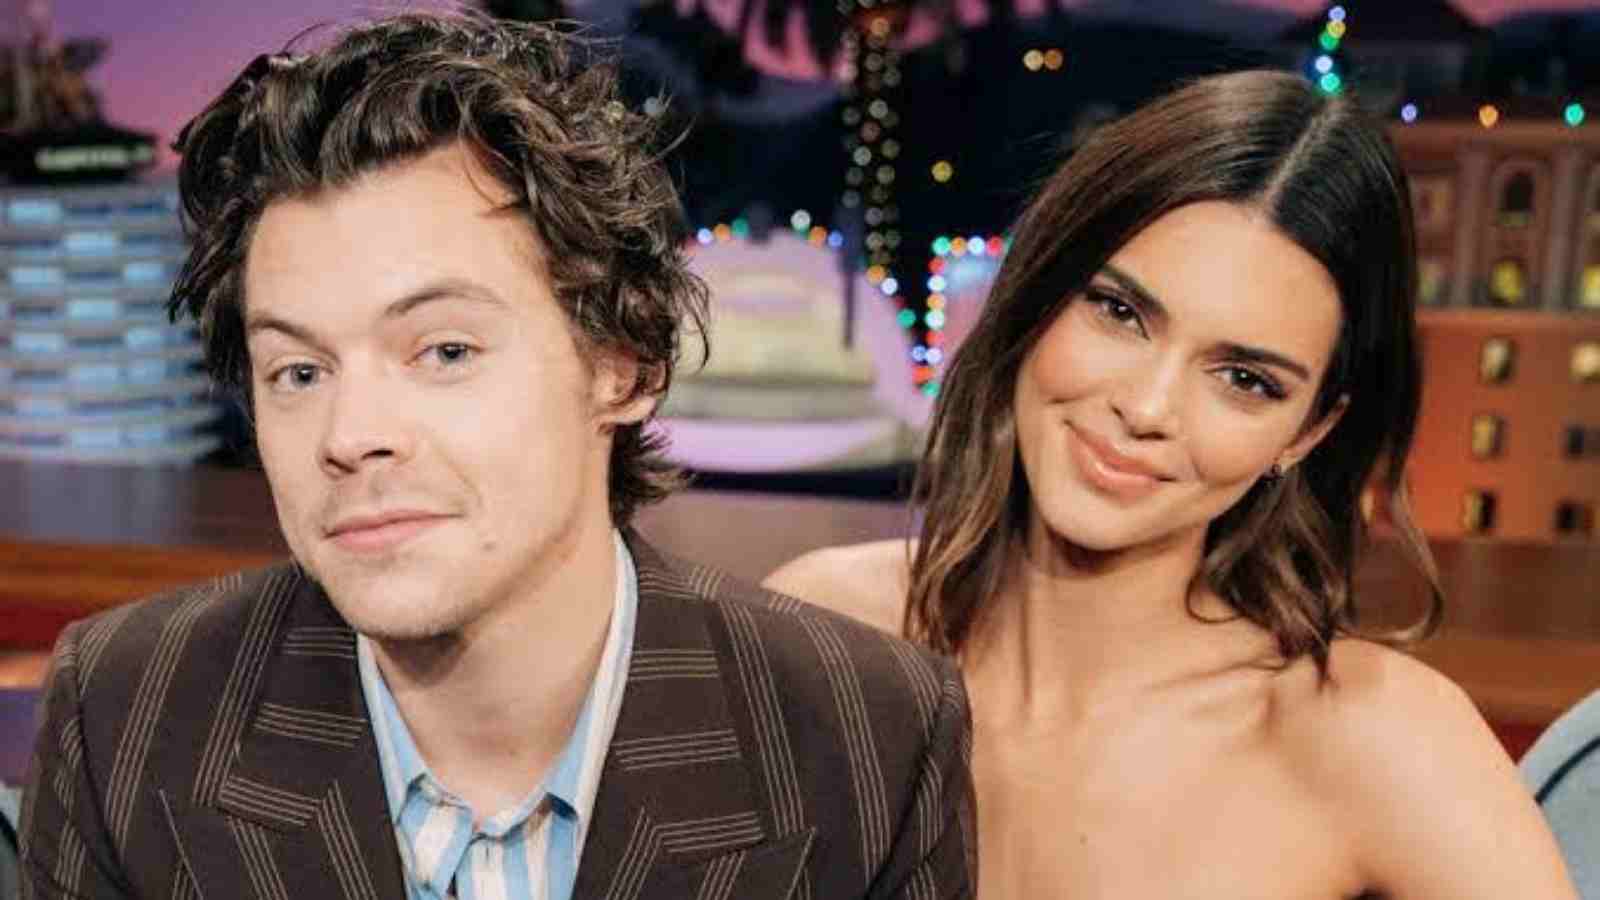 Kendall Jenner asked a question to Harry Styles about their relationship